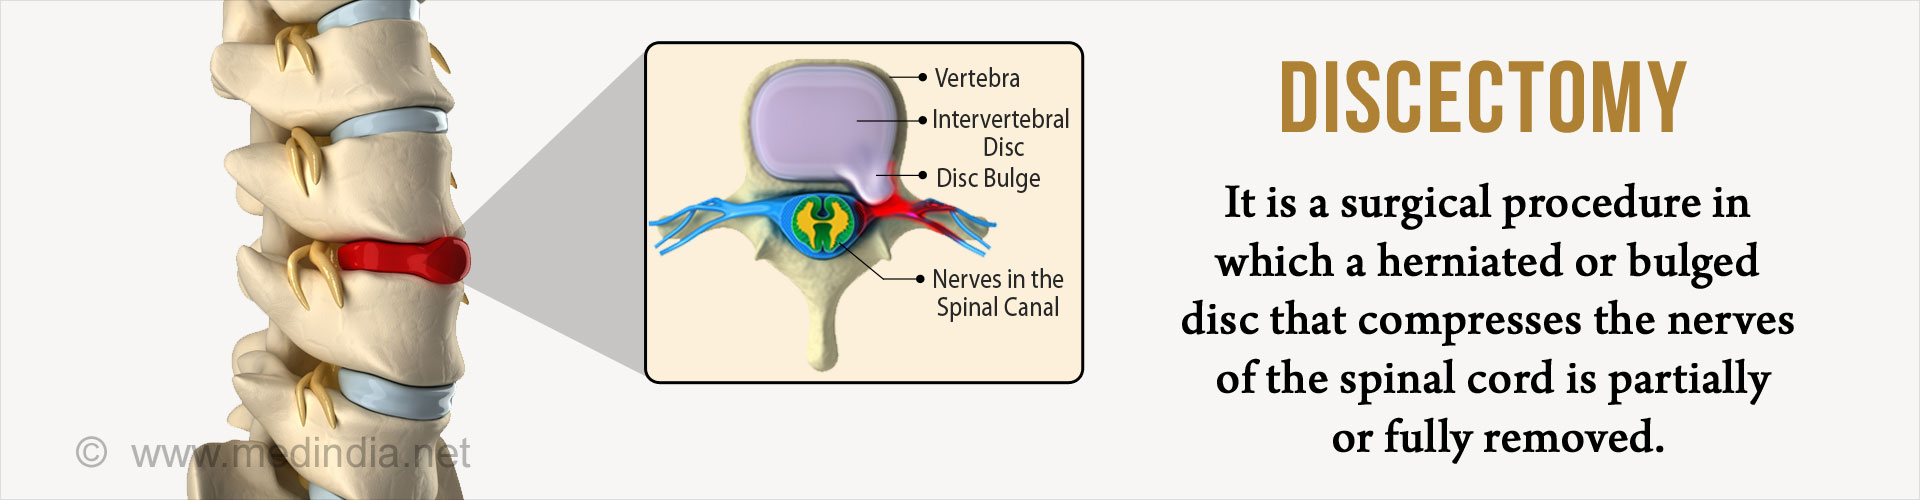 Discectomy - is a surgical procedure in which a herniated or bulged disc that compresses the nerves of the spinal cord is partially or fully removed.